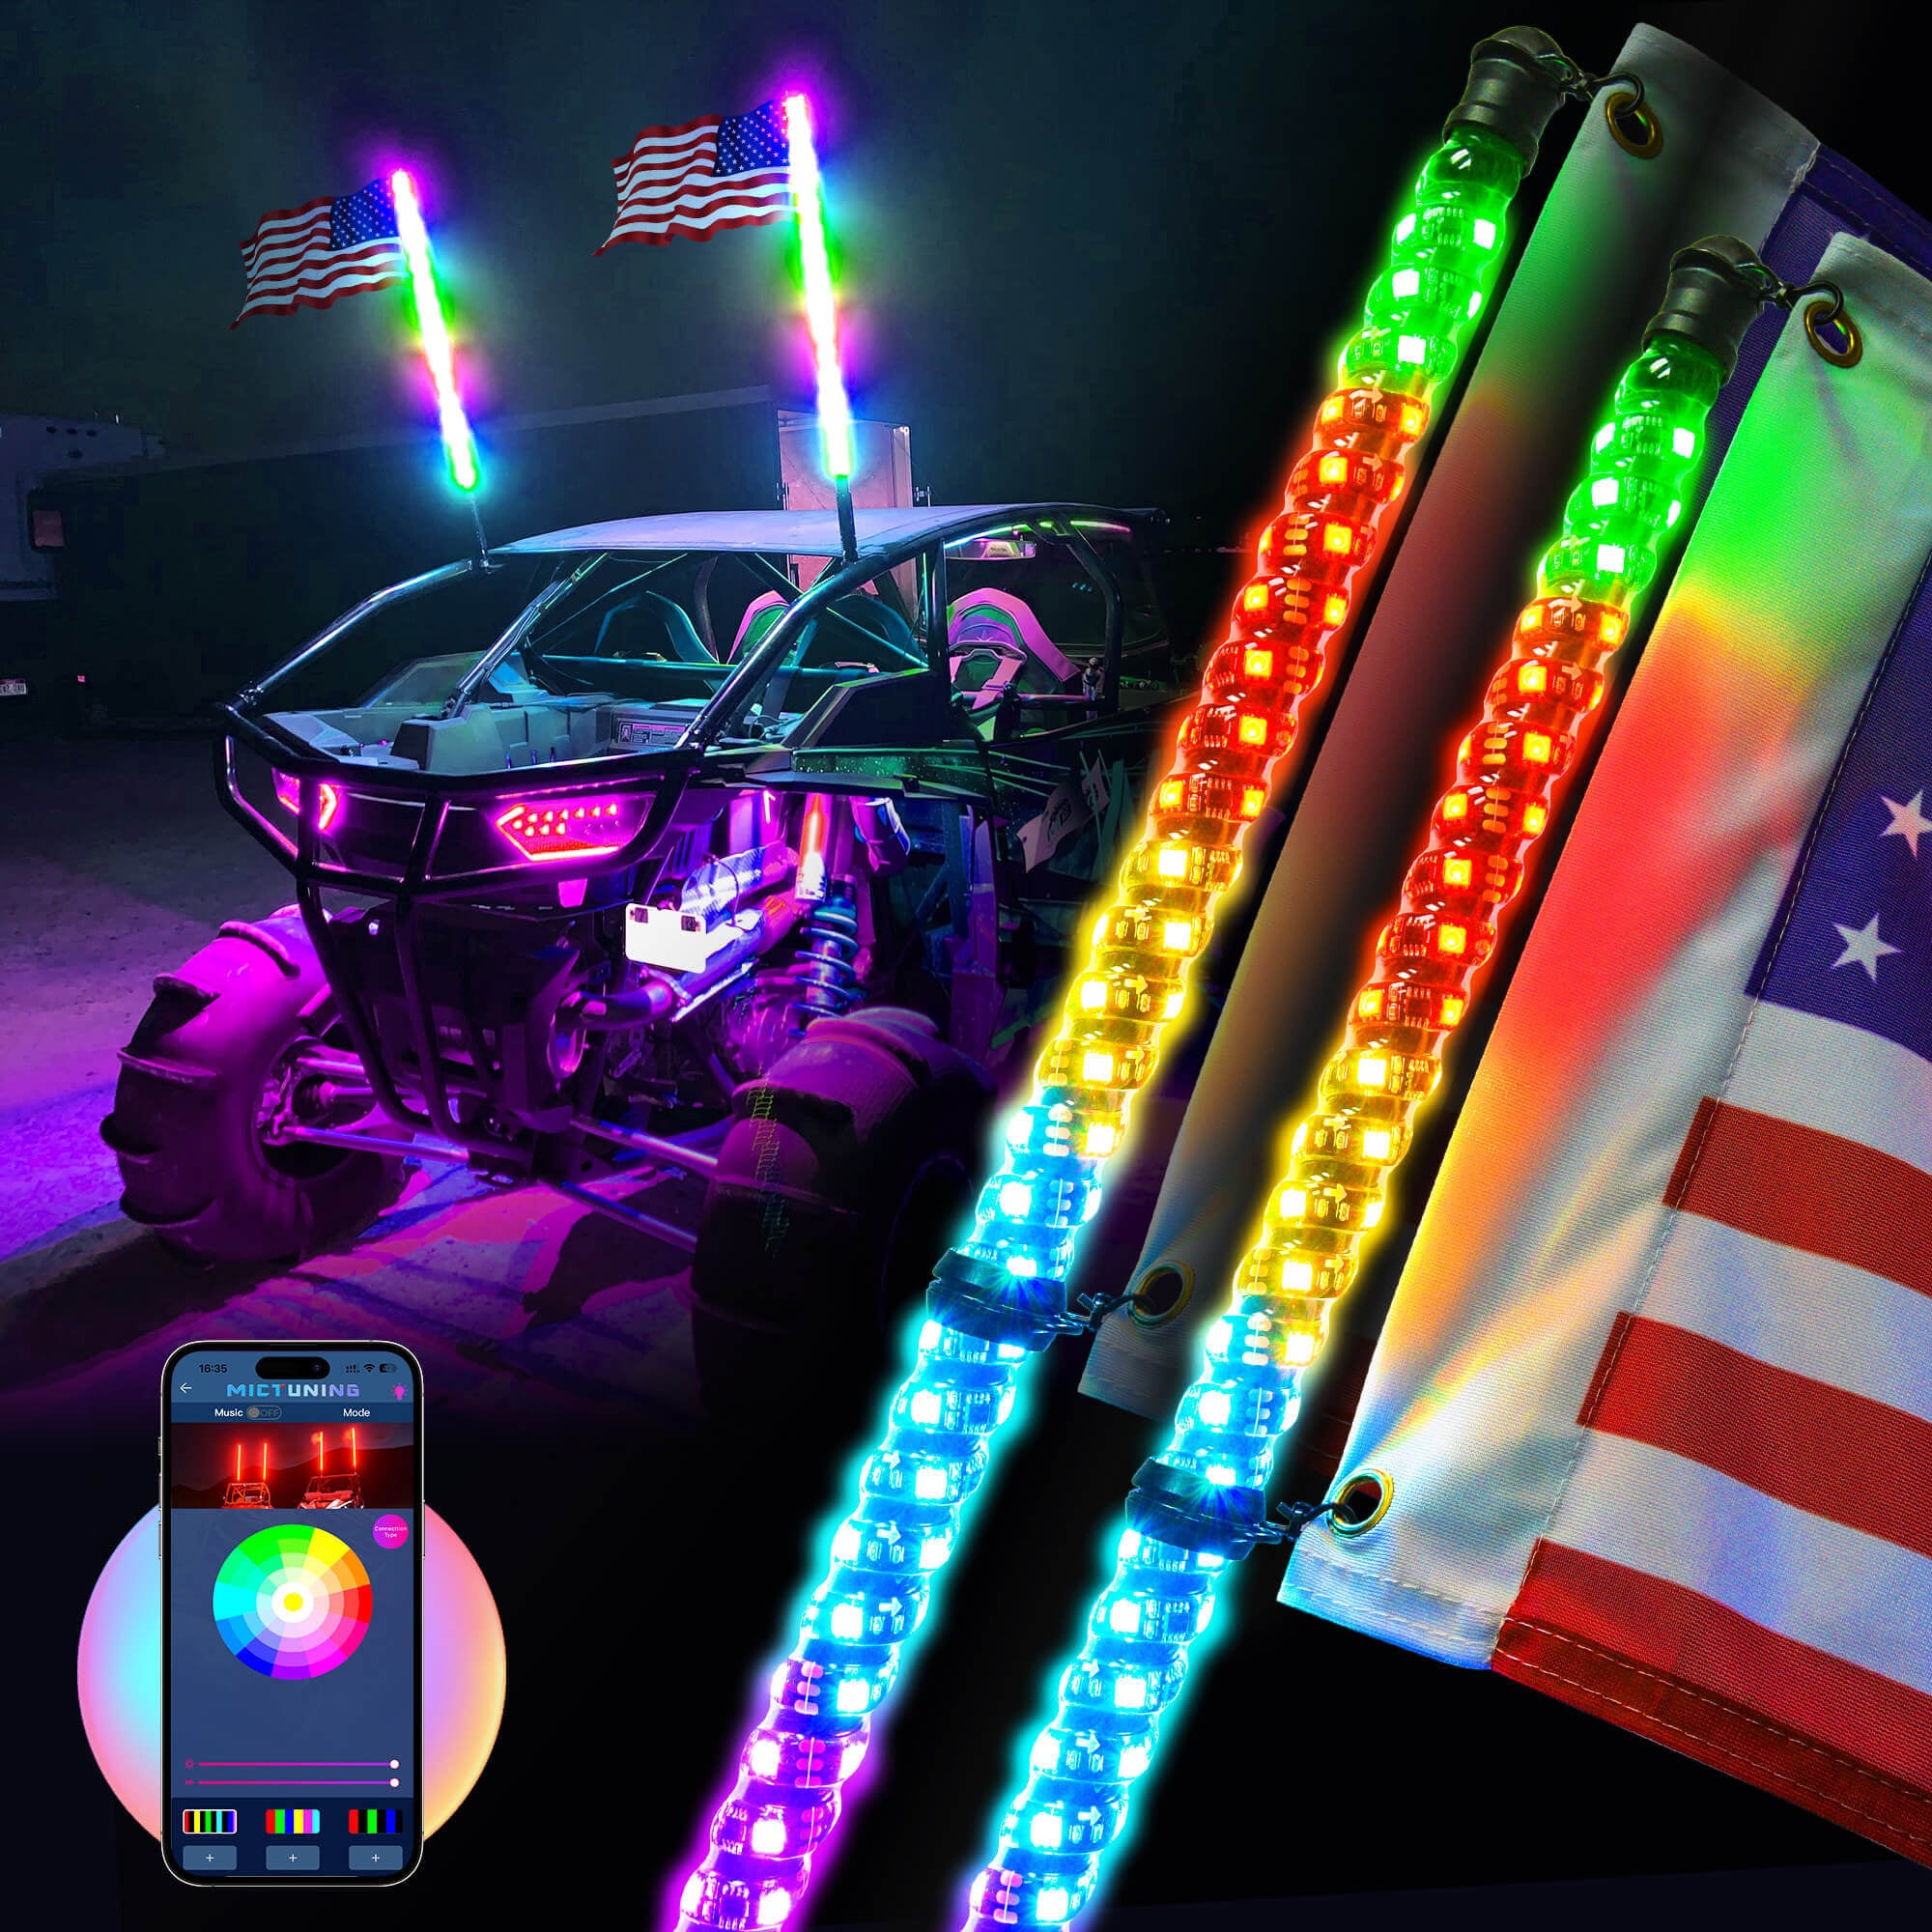 3FT/4FT LED Whip Lights 2pcs - Spiral Bendable RGB Chasing Color Antenna Whips - Bluetooth App Control